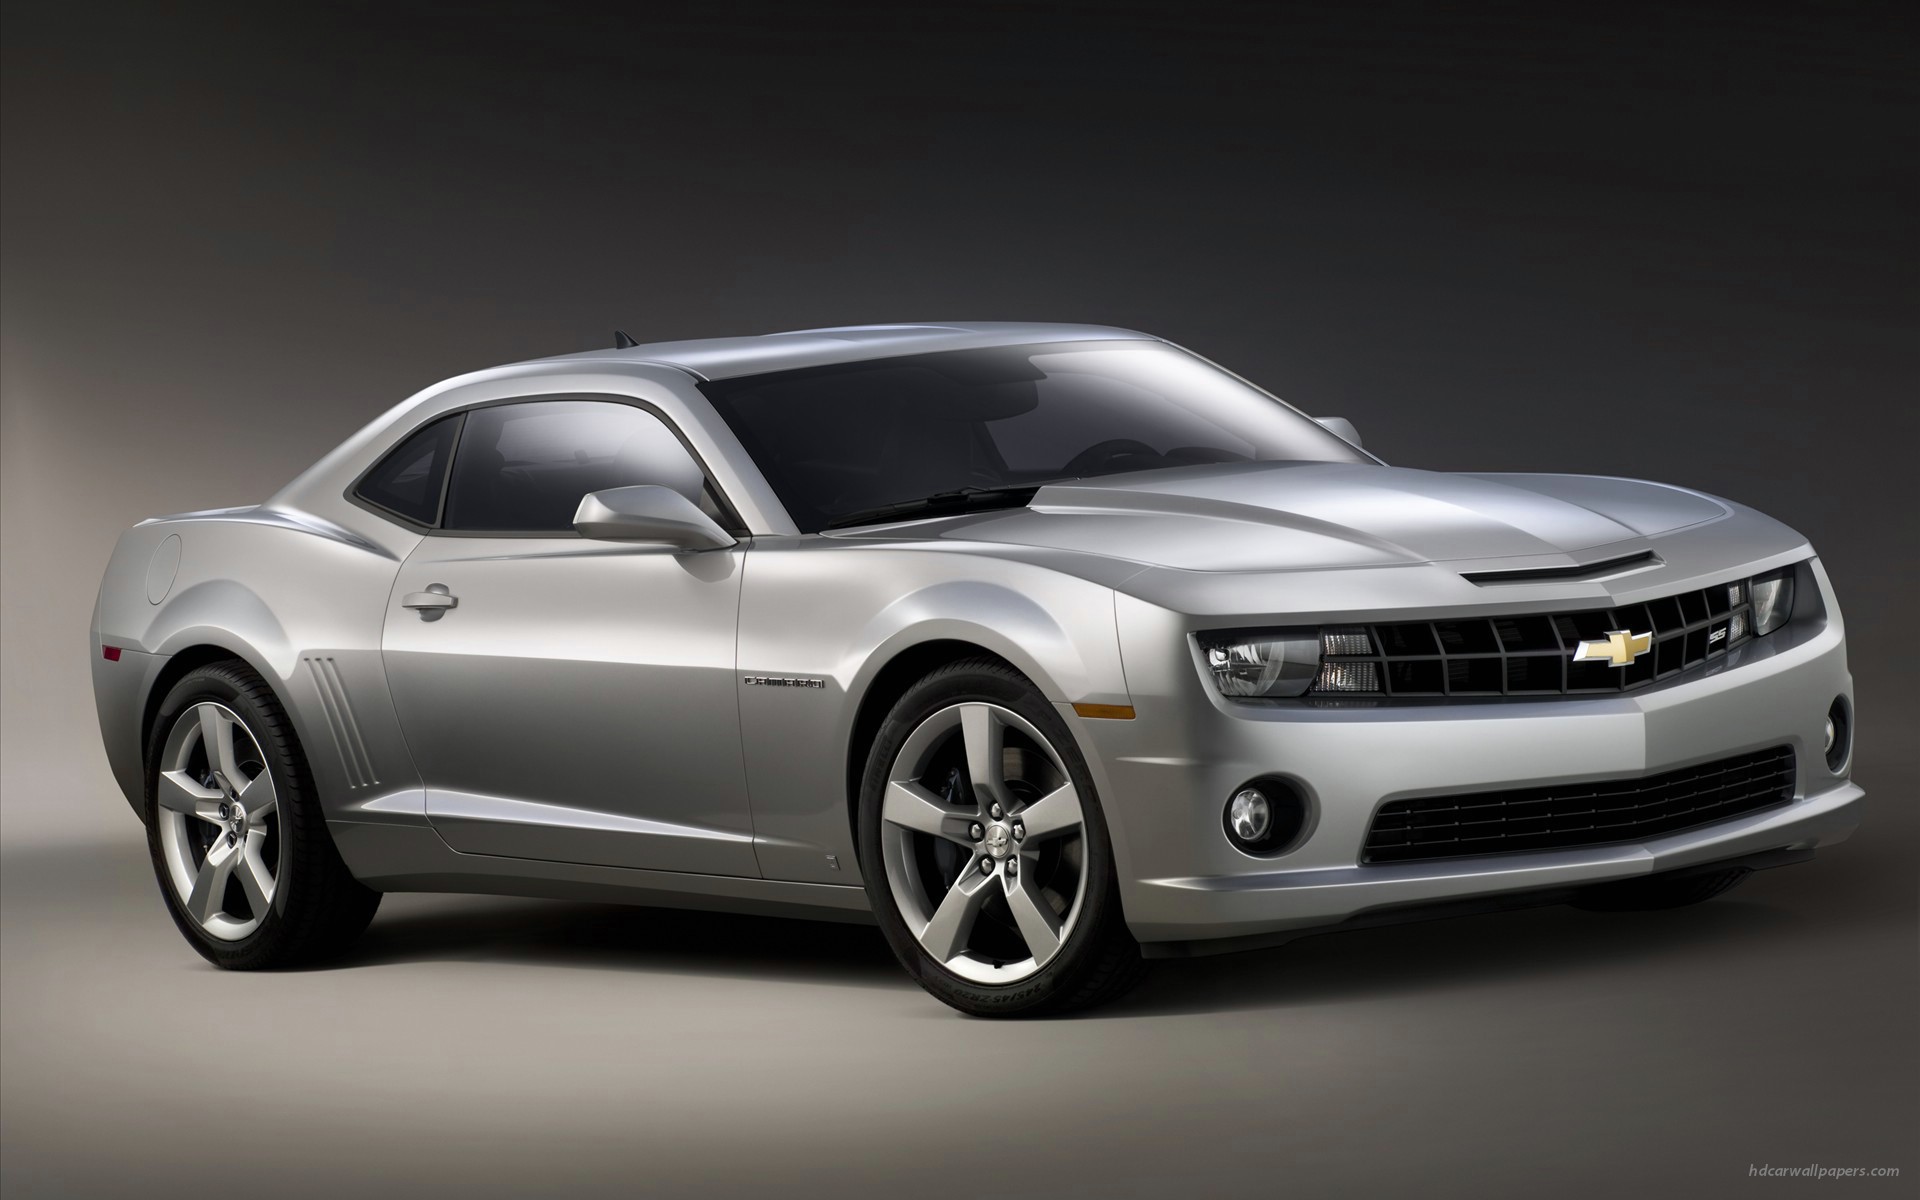 2010 Chevrolet Camaro SS 3 Wallpapers HD Wallpapers